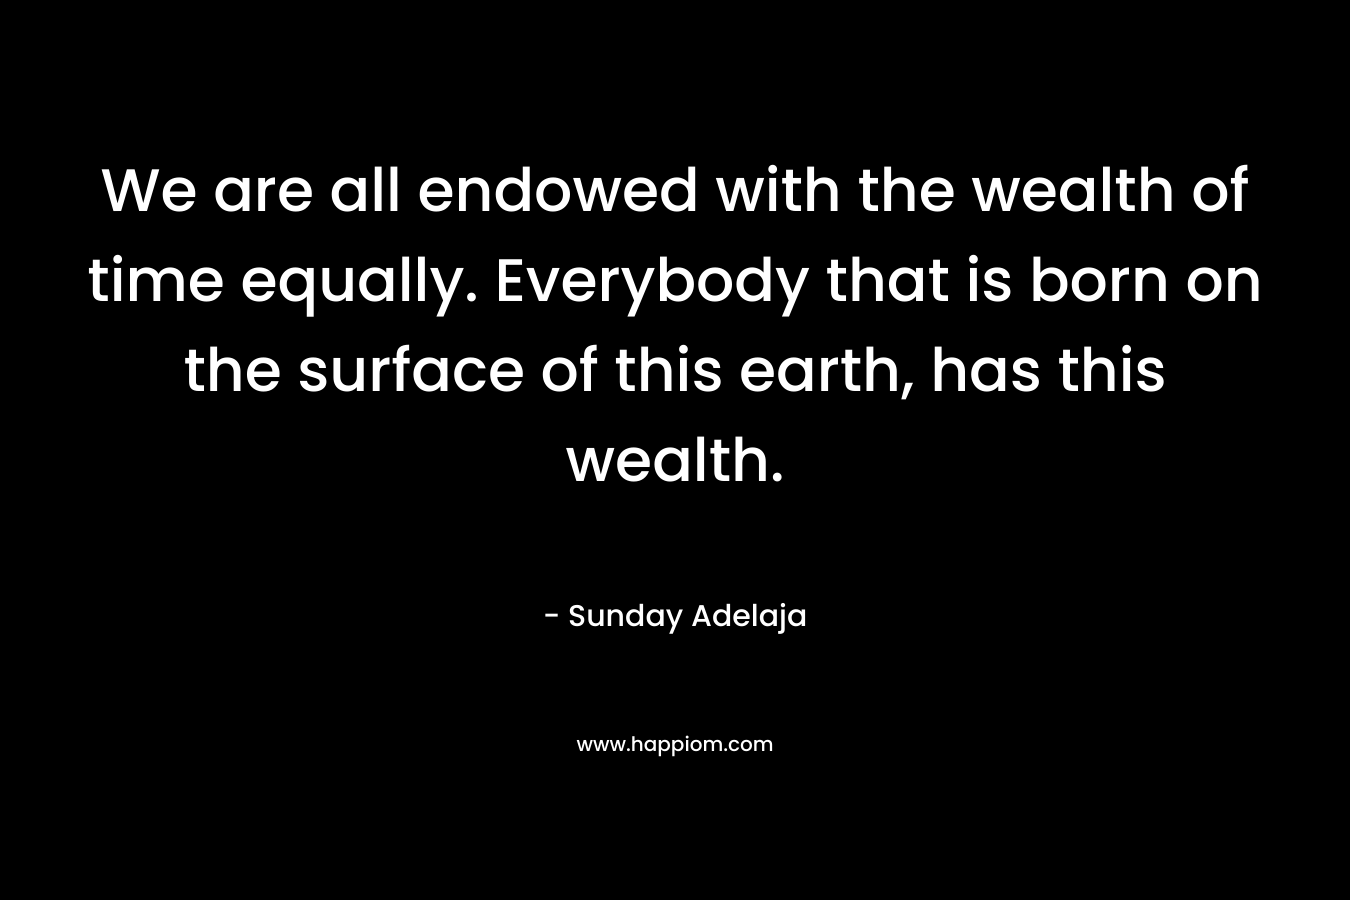 We are all endowed with the wealth of time equally. Everybody that is born on the surface of this earth, has this wealth.